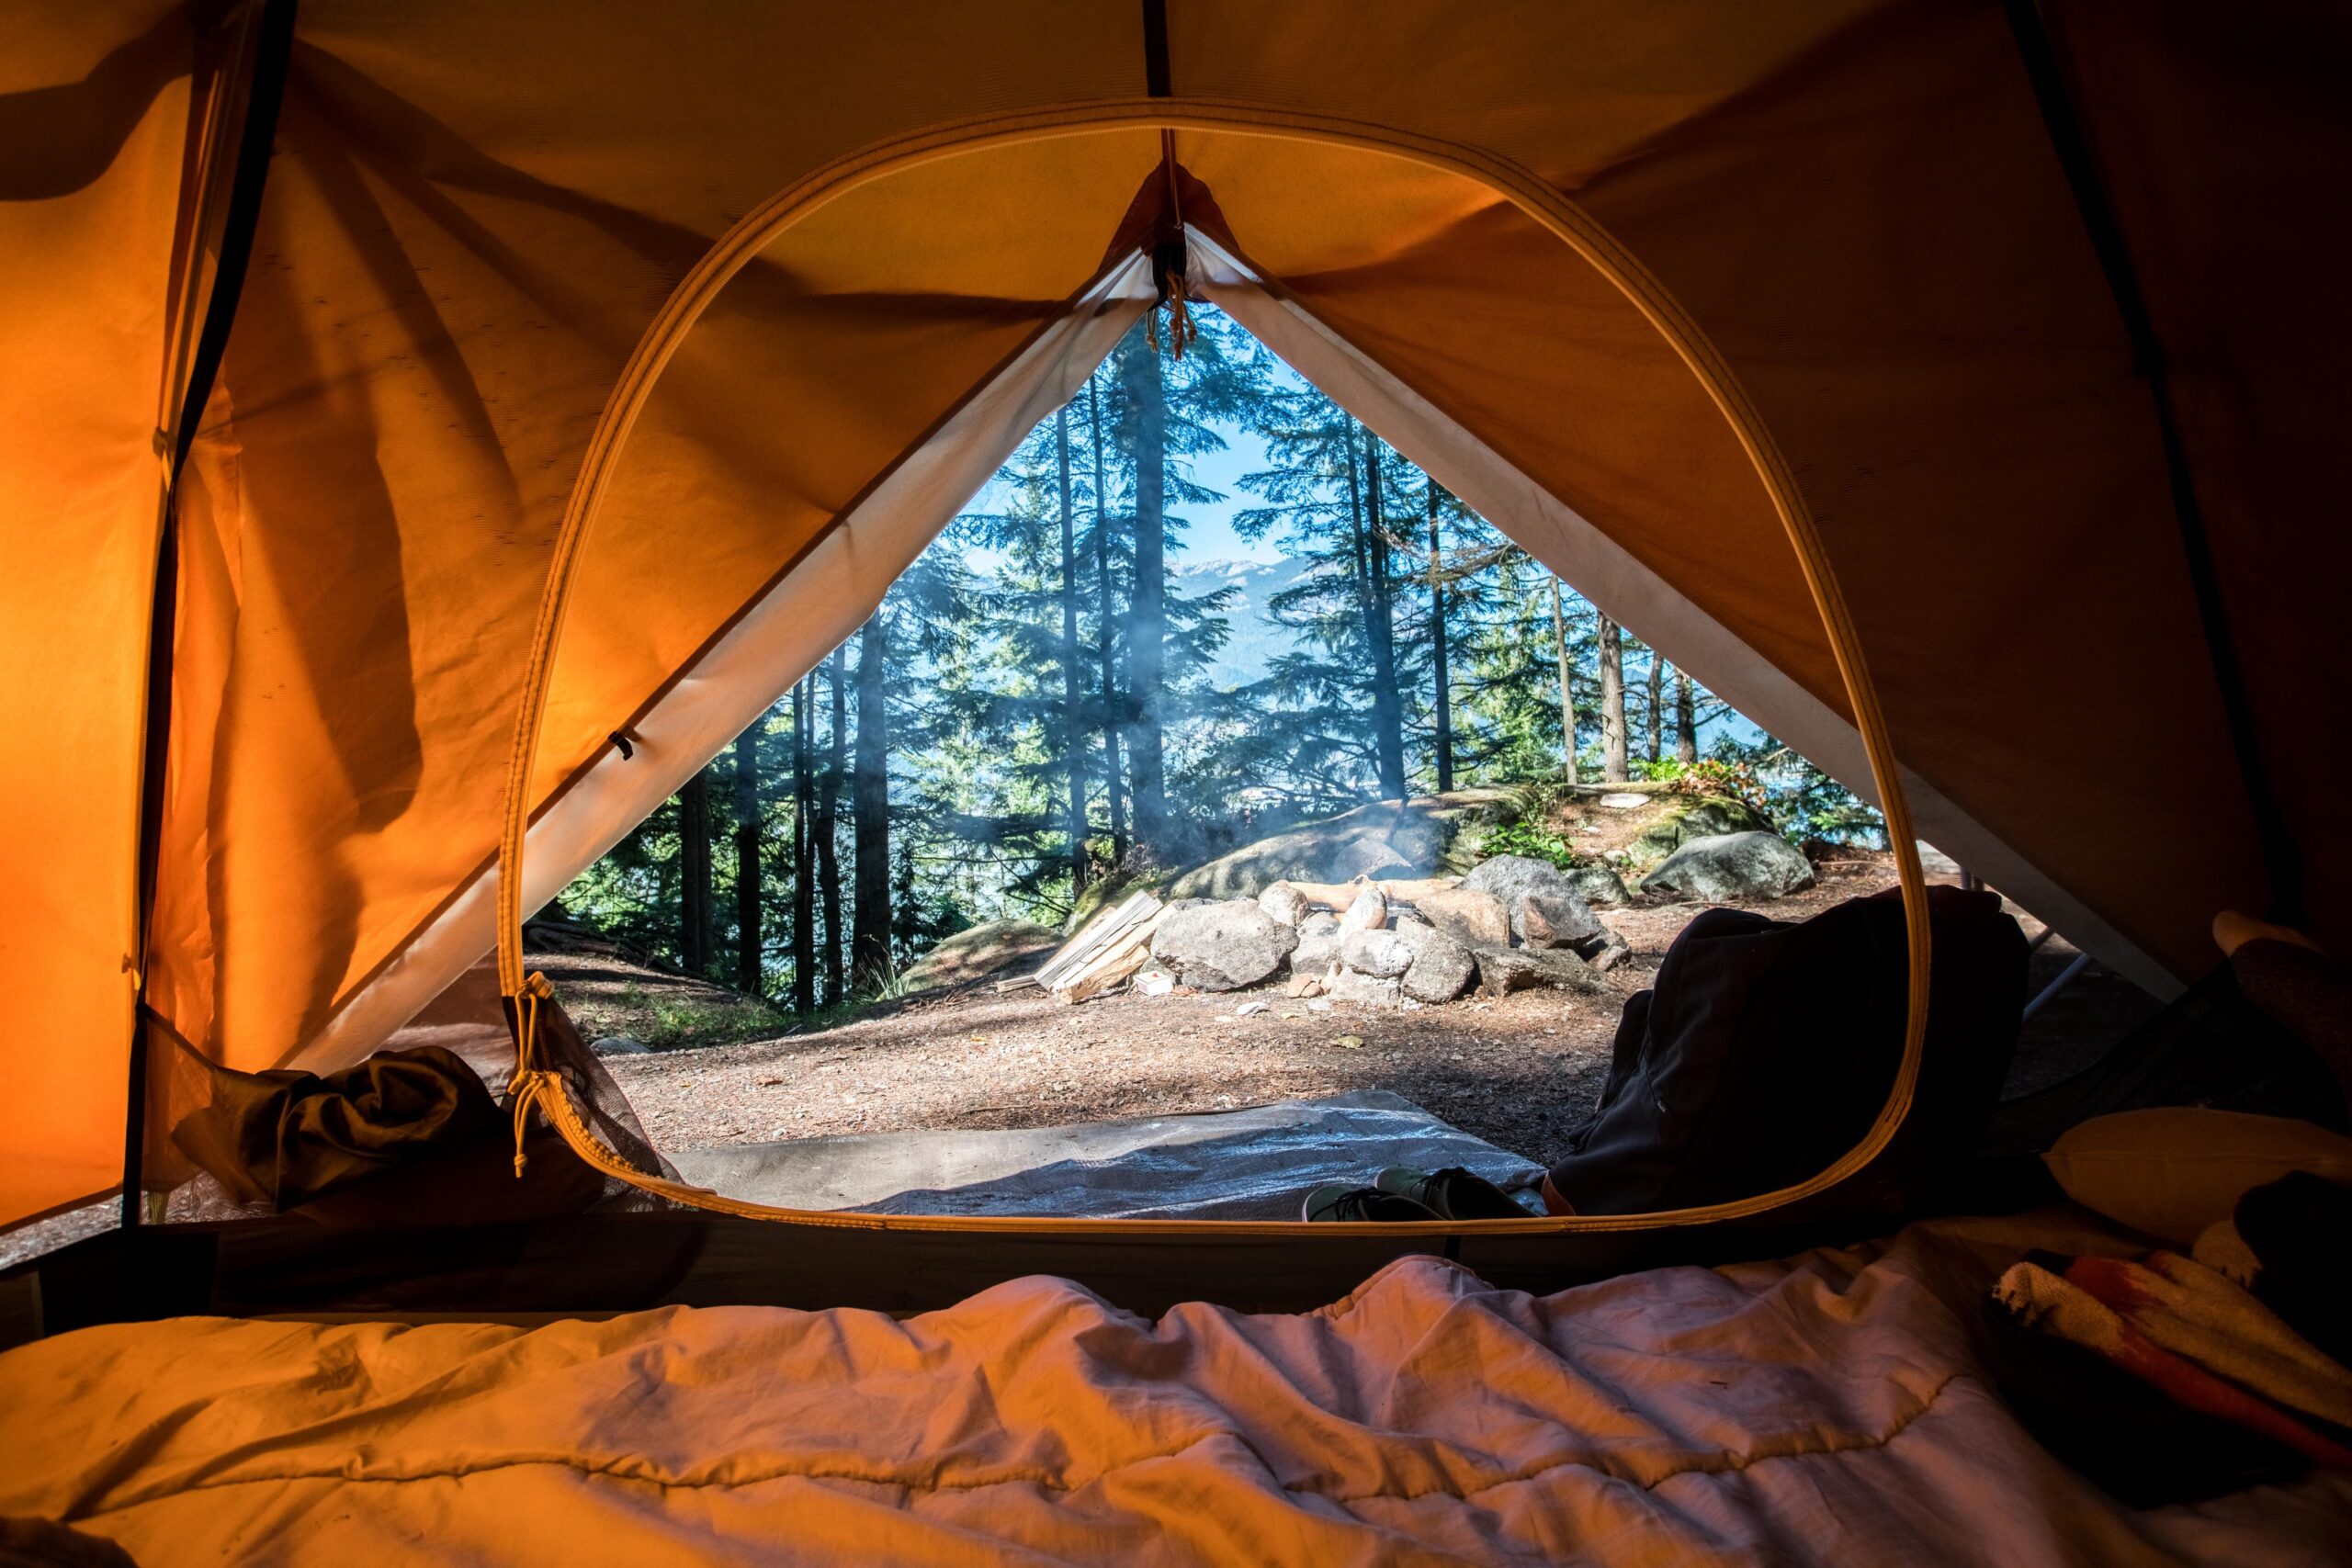 Tent camping with views